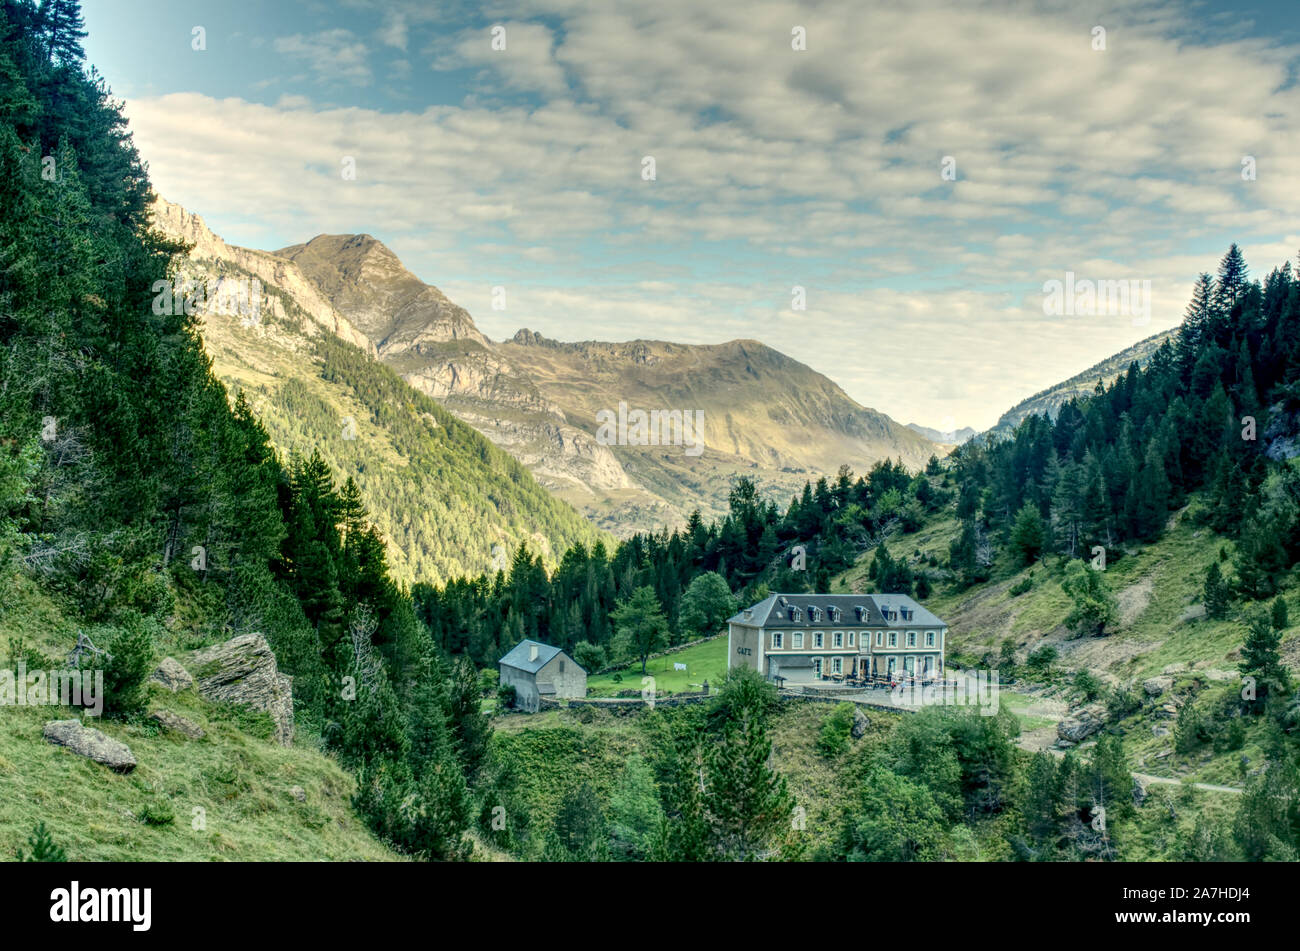 The Hotel du Cirque and the valley beyond from the Cirque de Gavarnie Stock Photo